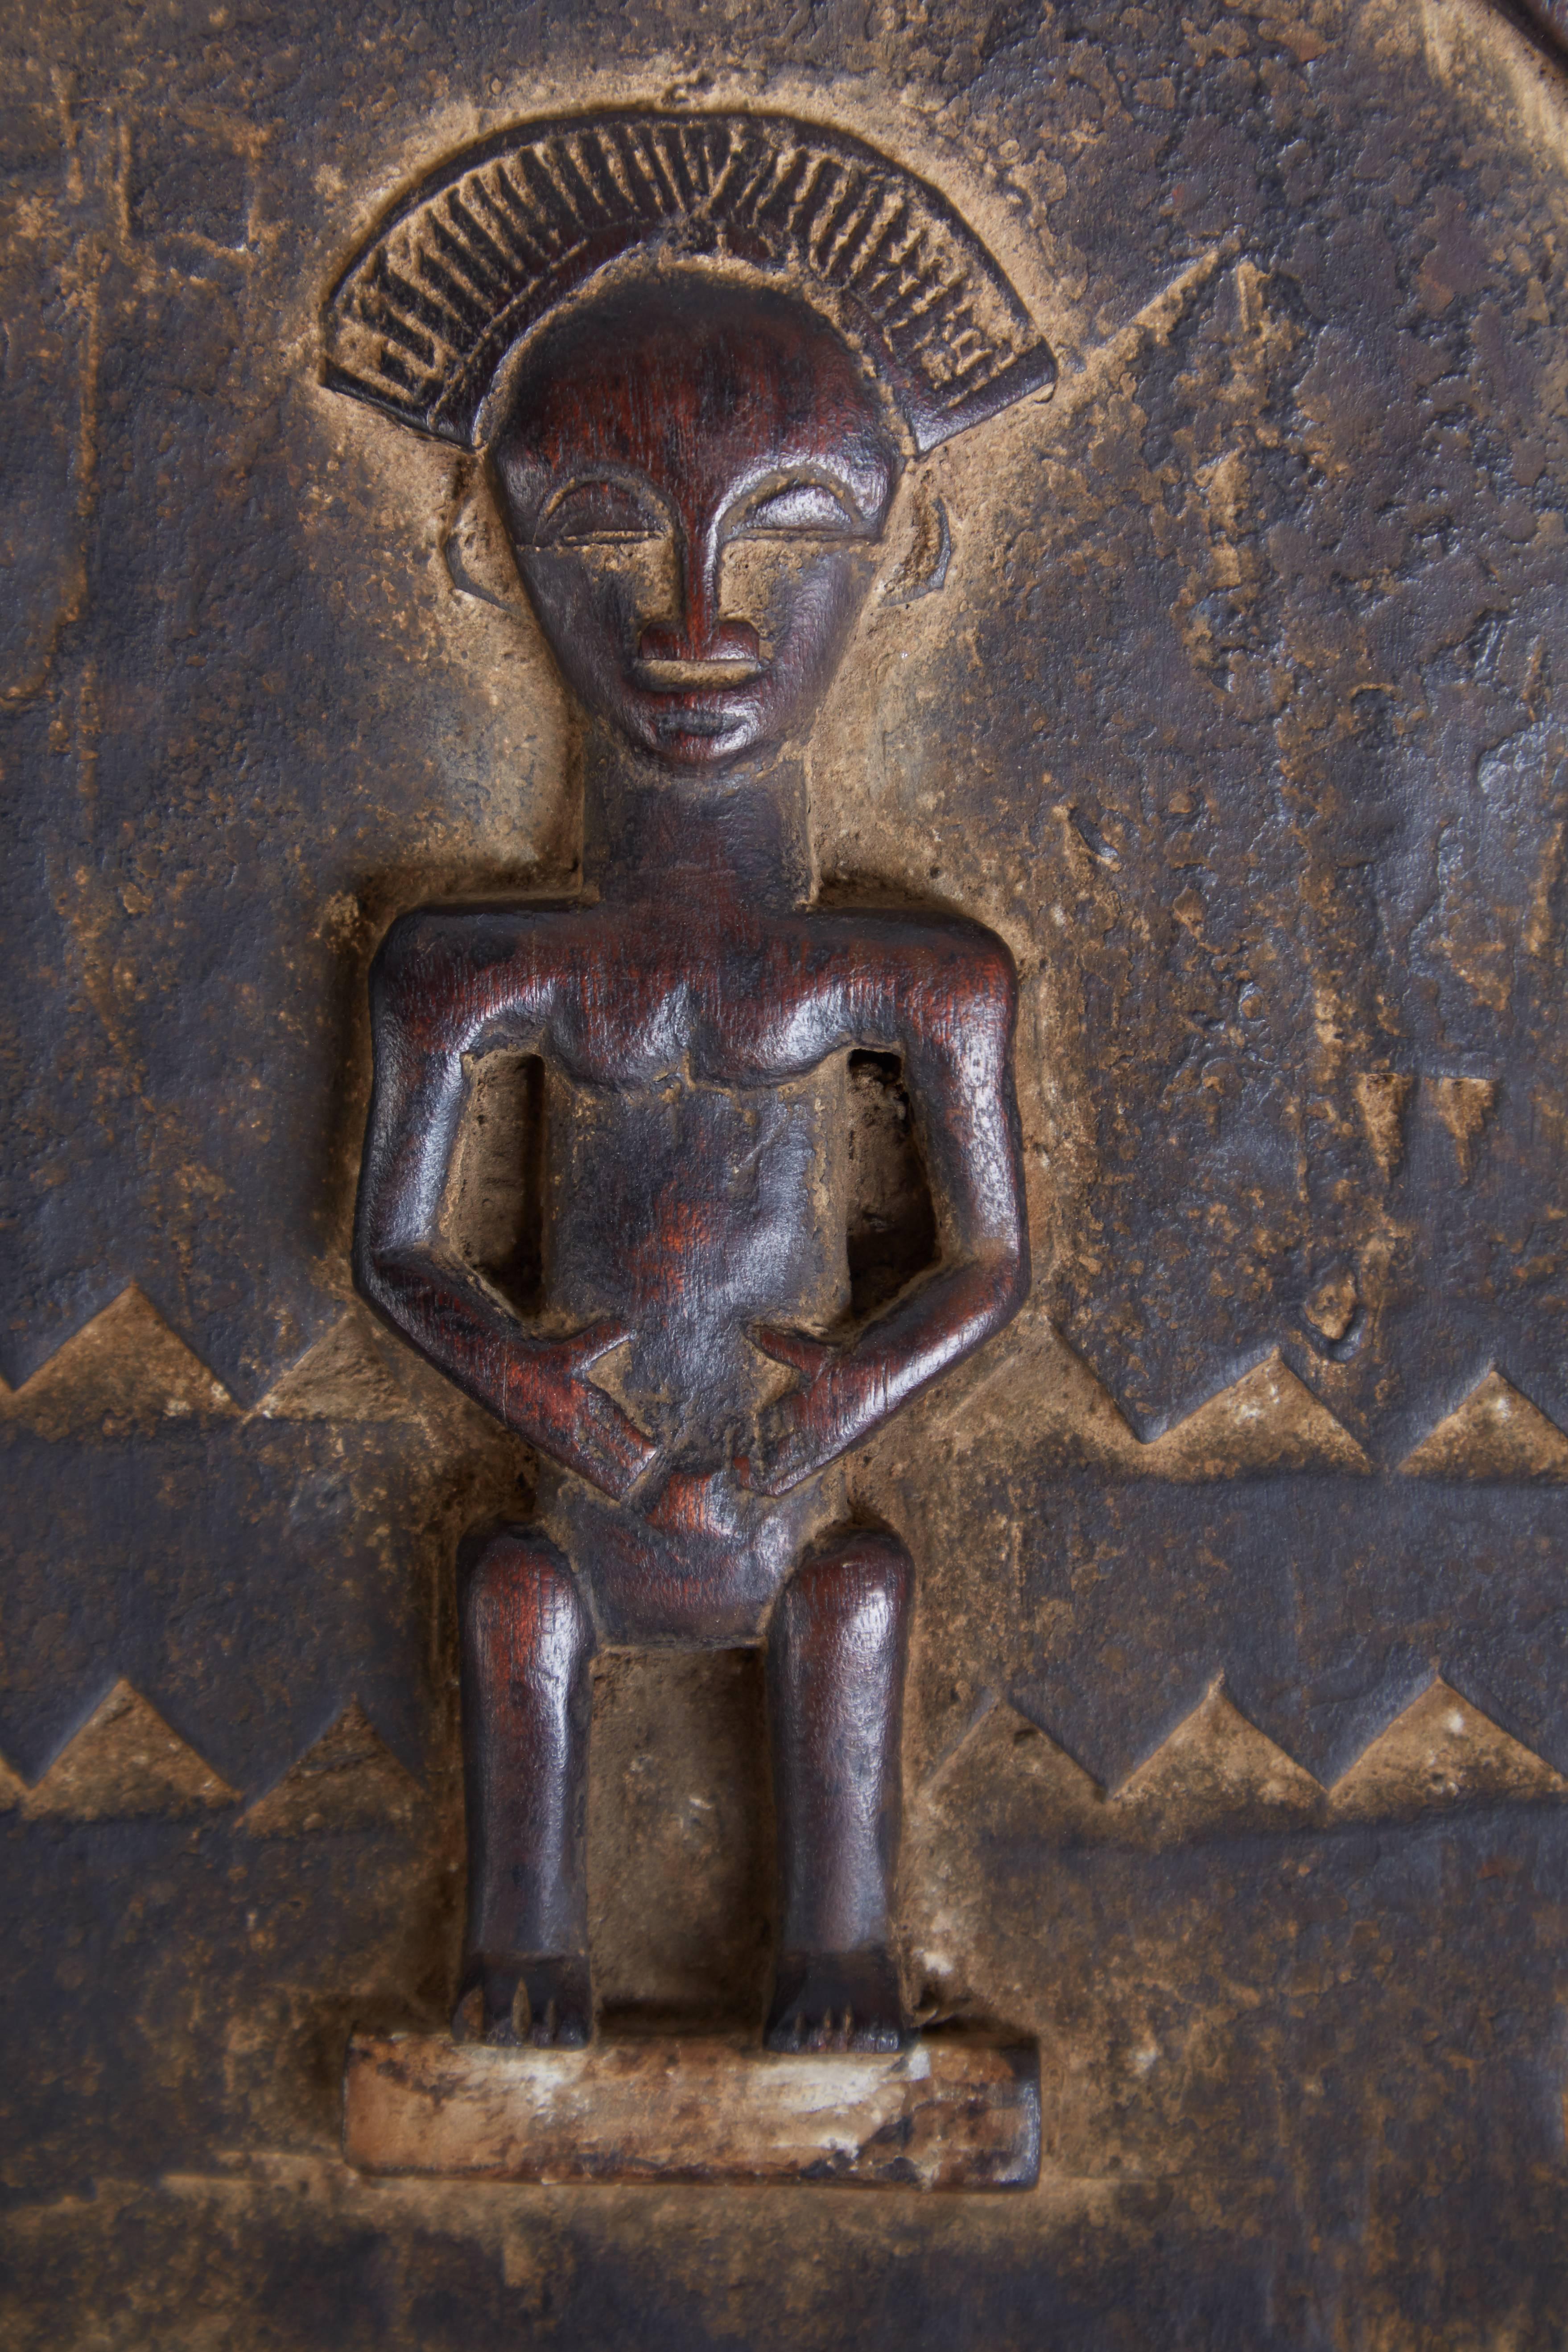 Petite decorative Ivory Coast carved granary door featuring an African figure, snake and fierce looking predatory animal below. There is also a repeating small chevron pattern around the border and across the center and two spokes at one end where